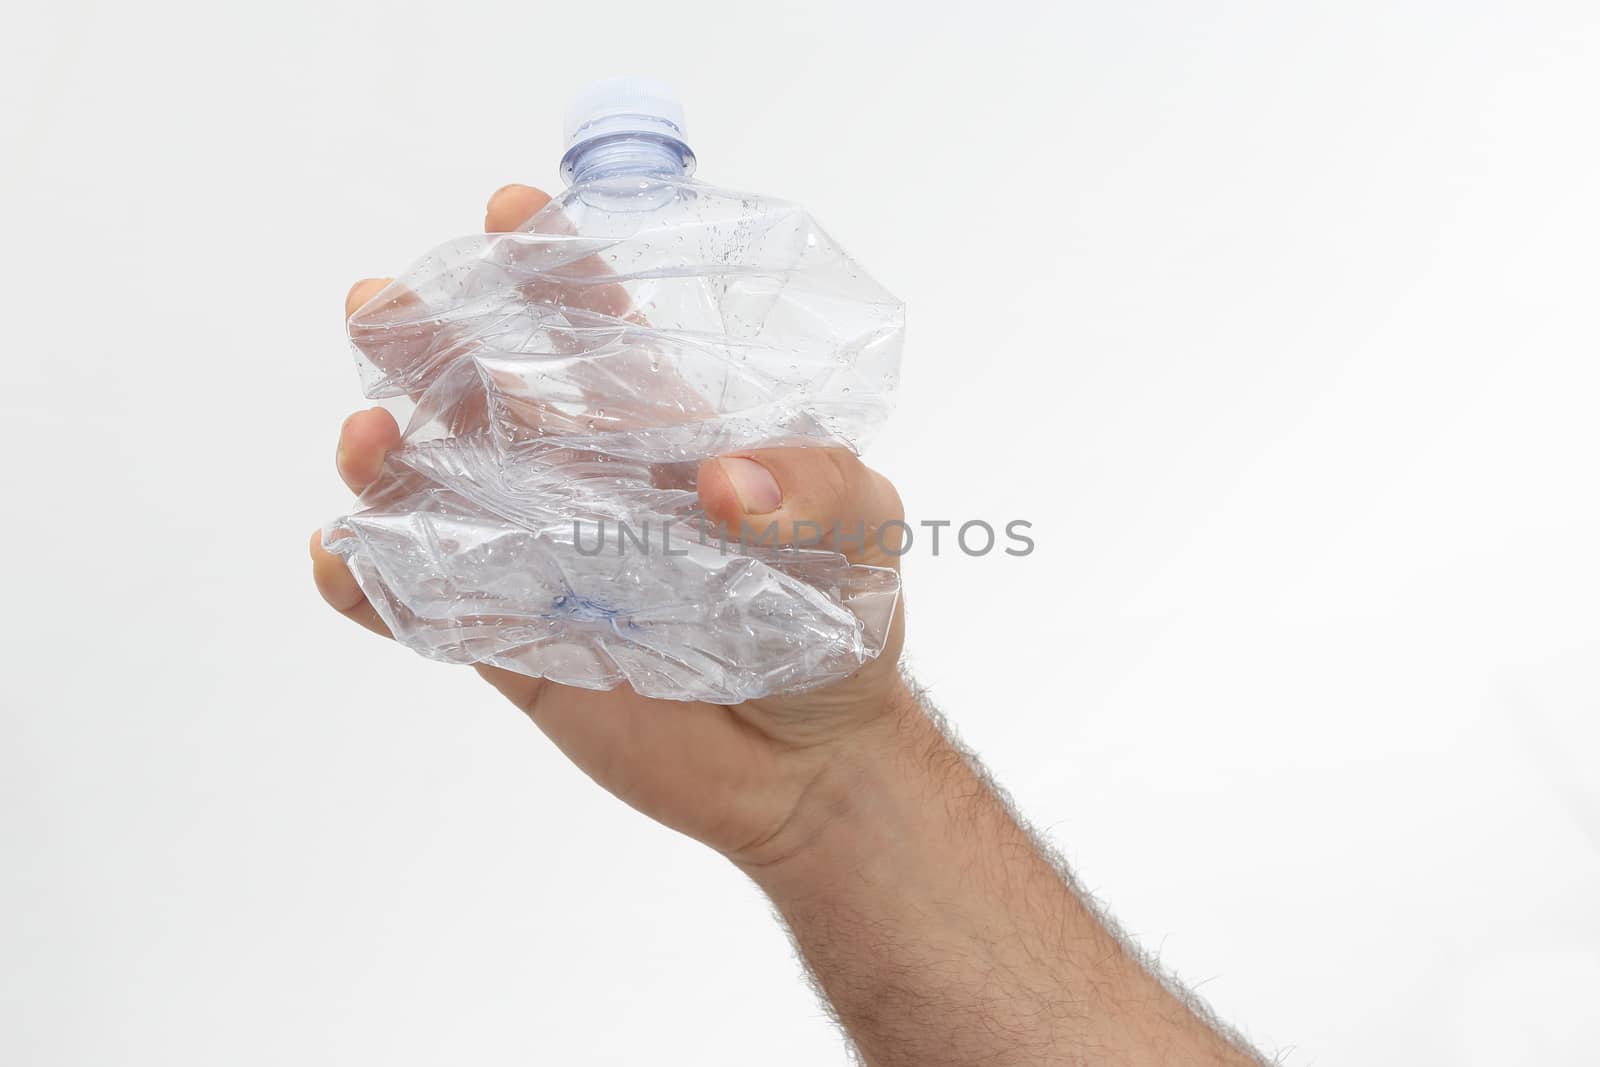 conceptual plastic free photo - the plastic bottle held in the hand